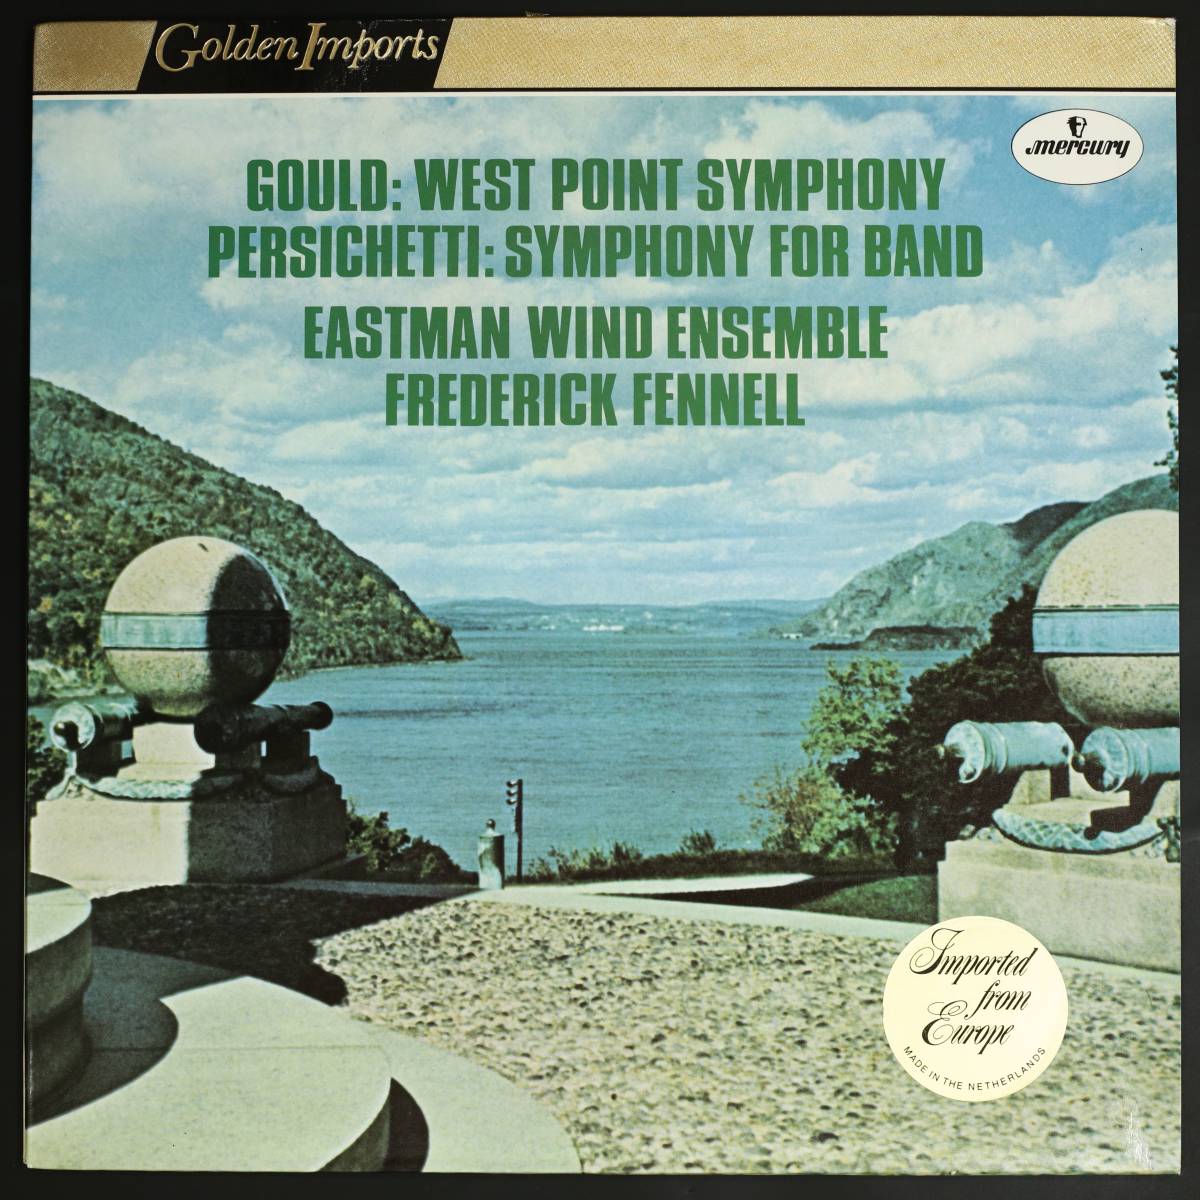 [ orchid record LP] Frederick *fe flannel /g-rudo: waste to Point symphony other ( average superior article,Mercury Living Presence,Frederick Fennell)